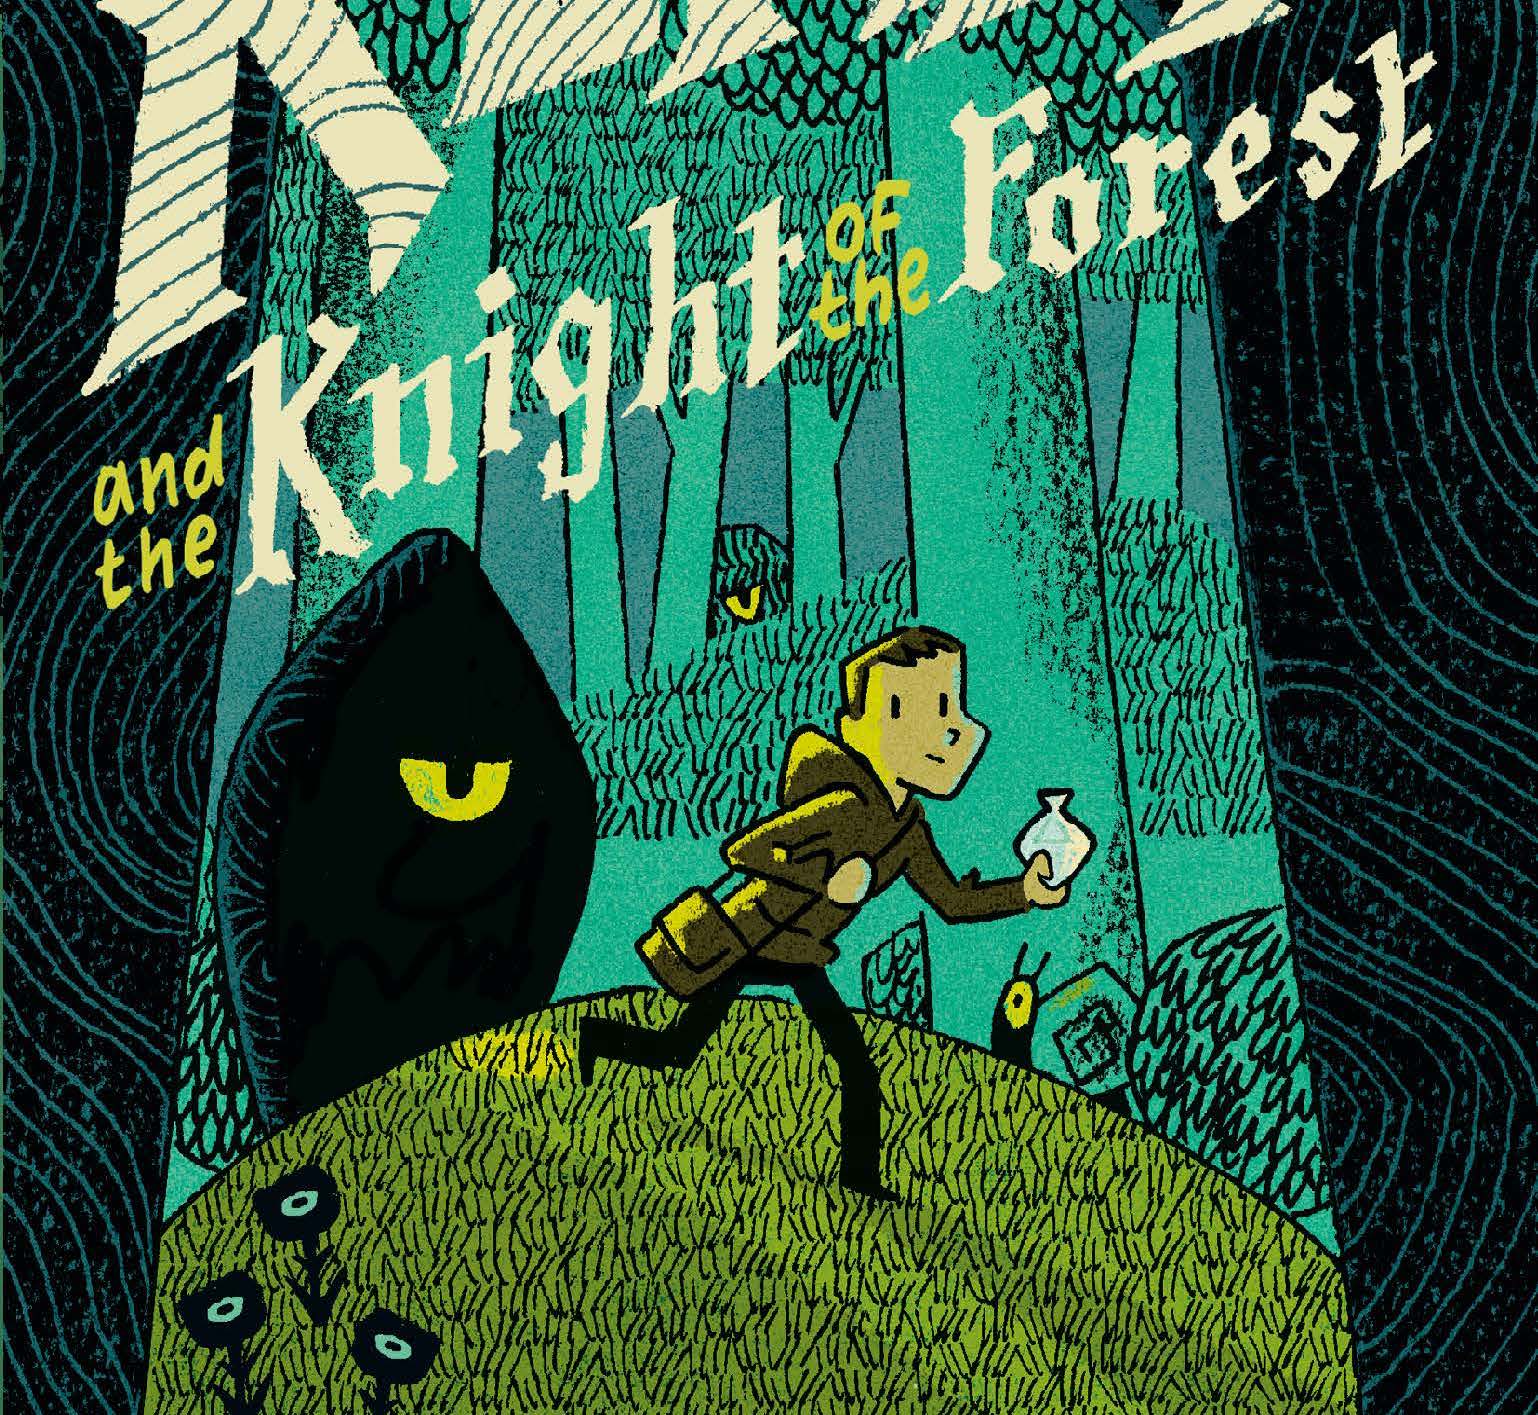 'Kerry and the Knight of the Forest' review: a charming story for your inner child